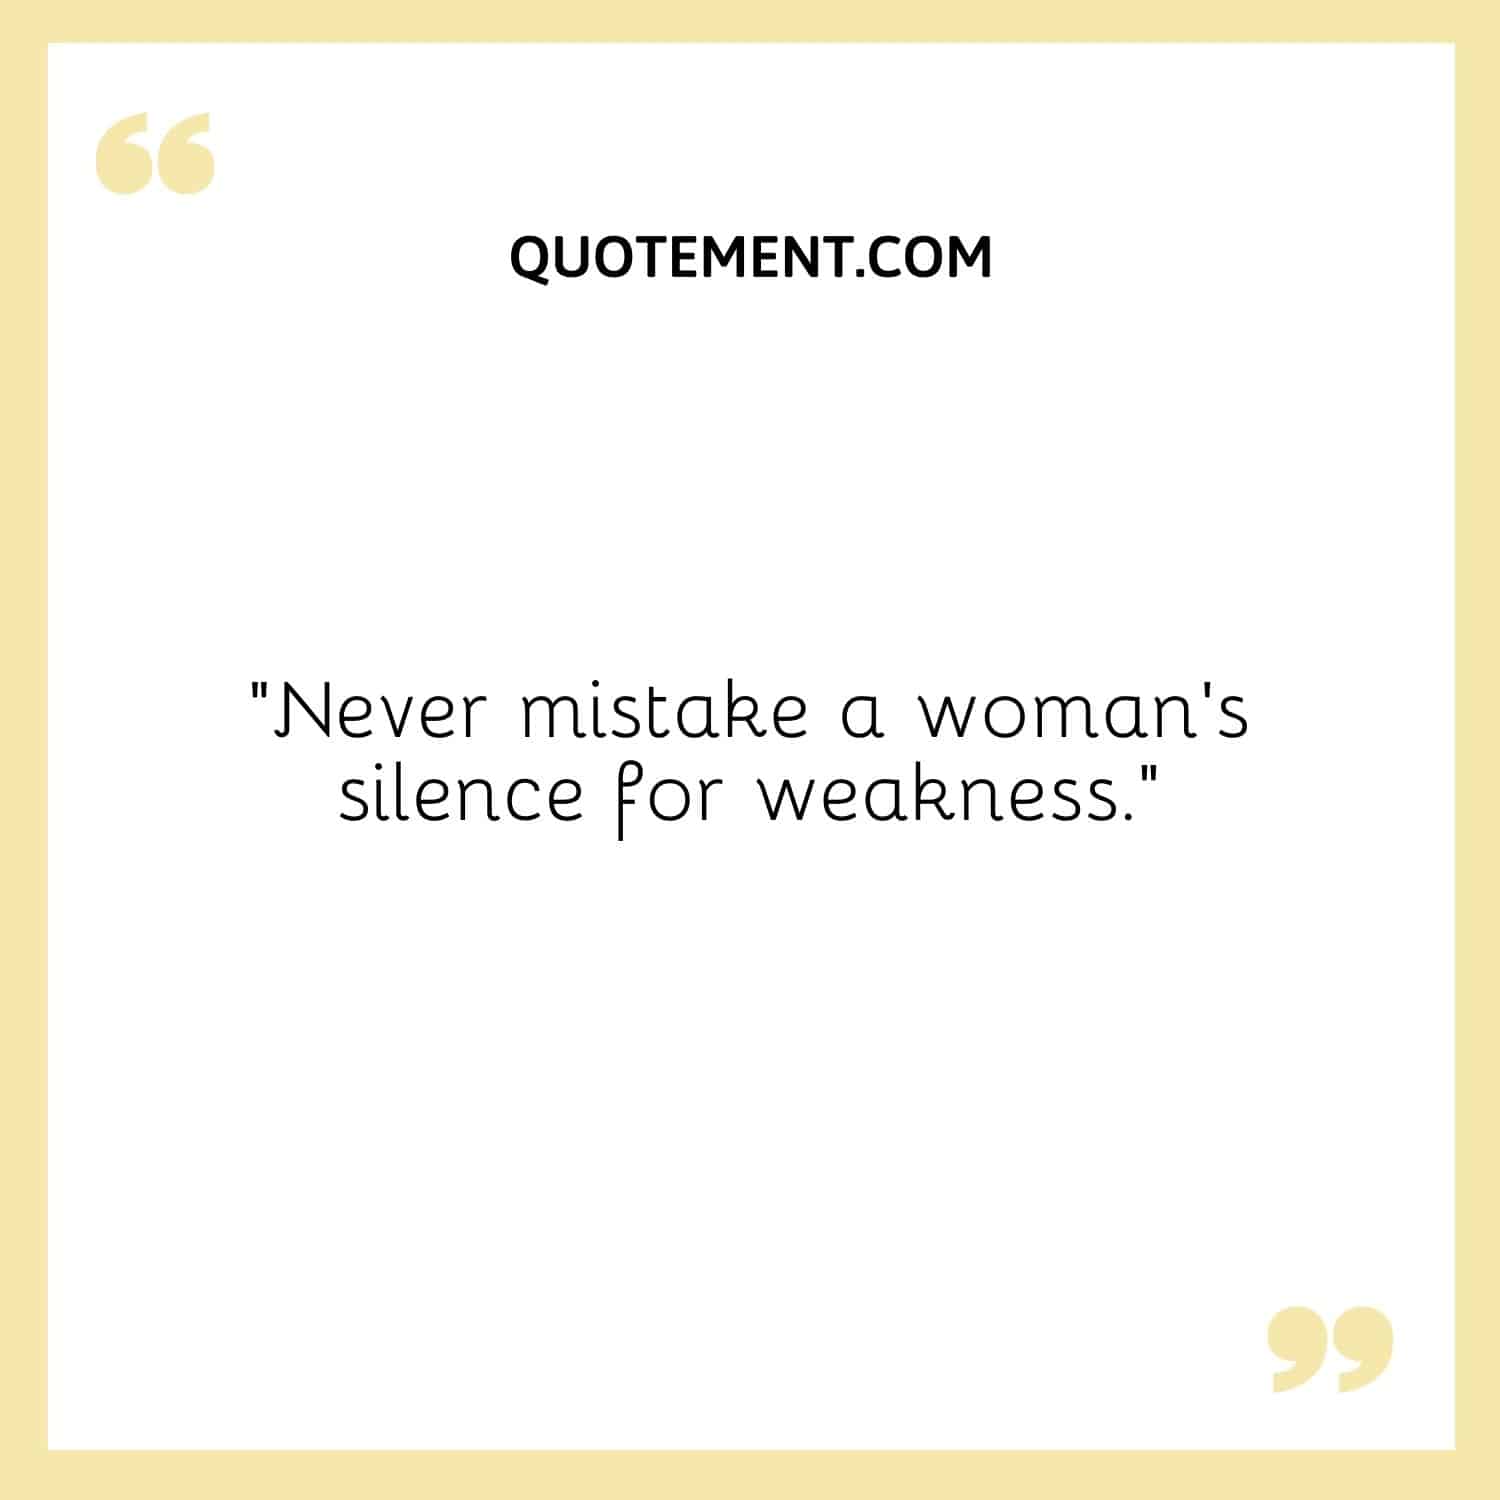 “Never mistake a woman’s silence for weakness.”